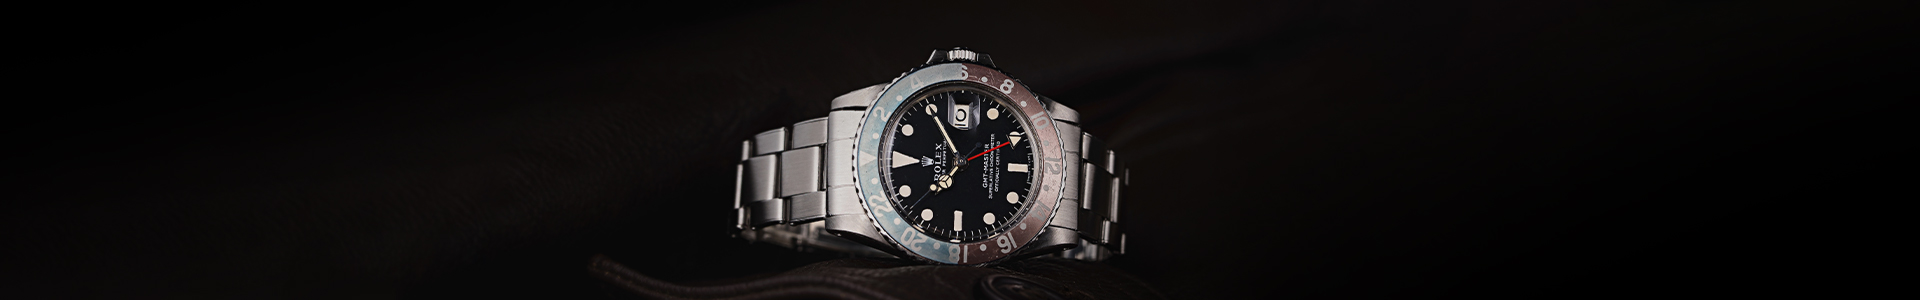 auction-rolex-gmt-master-1675-apollo-14-ocean-recovery